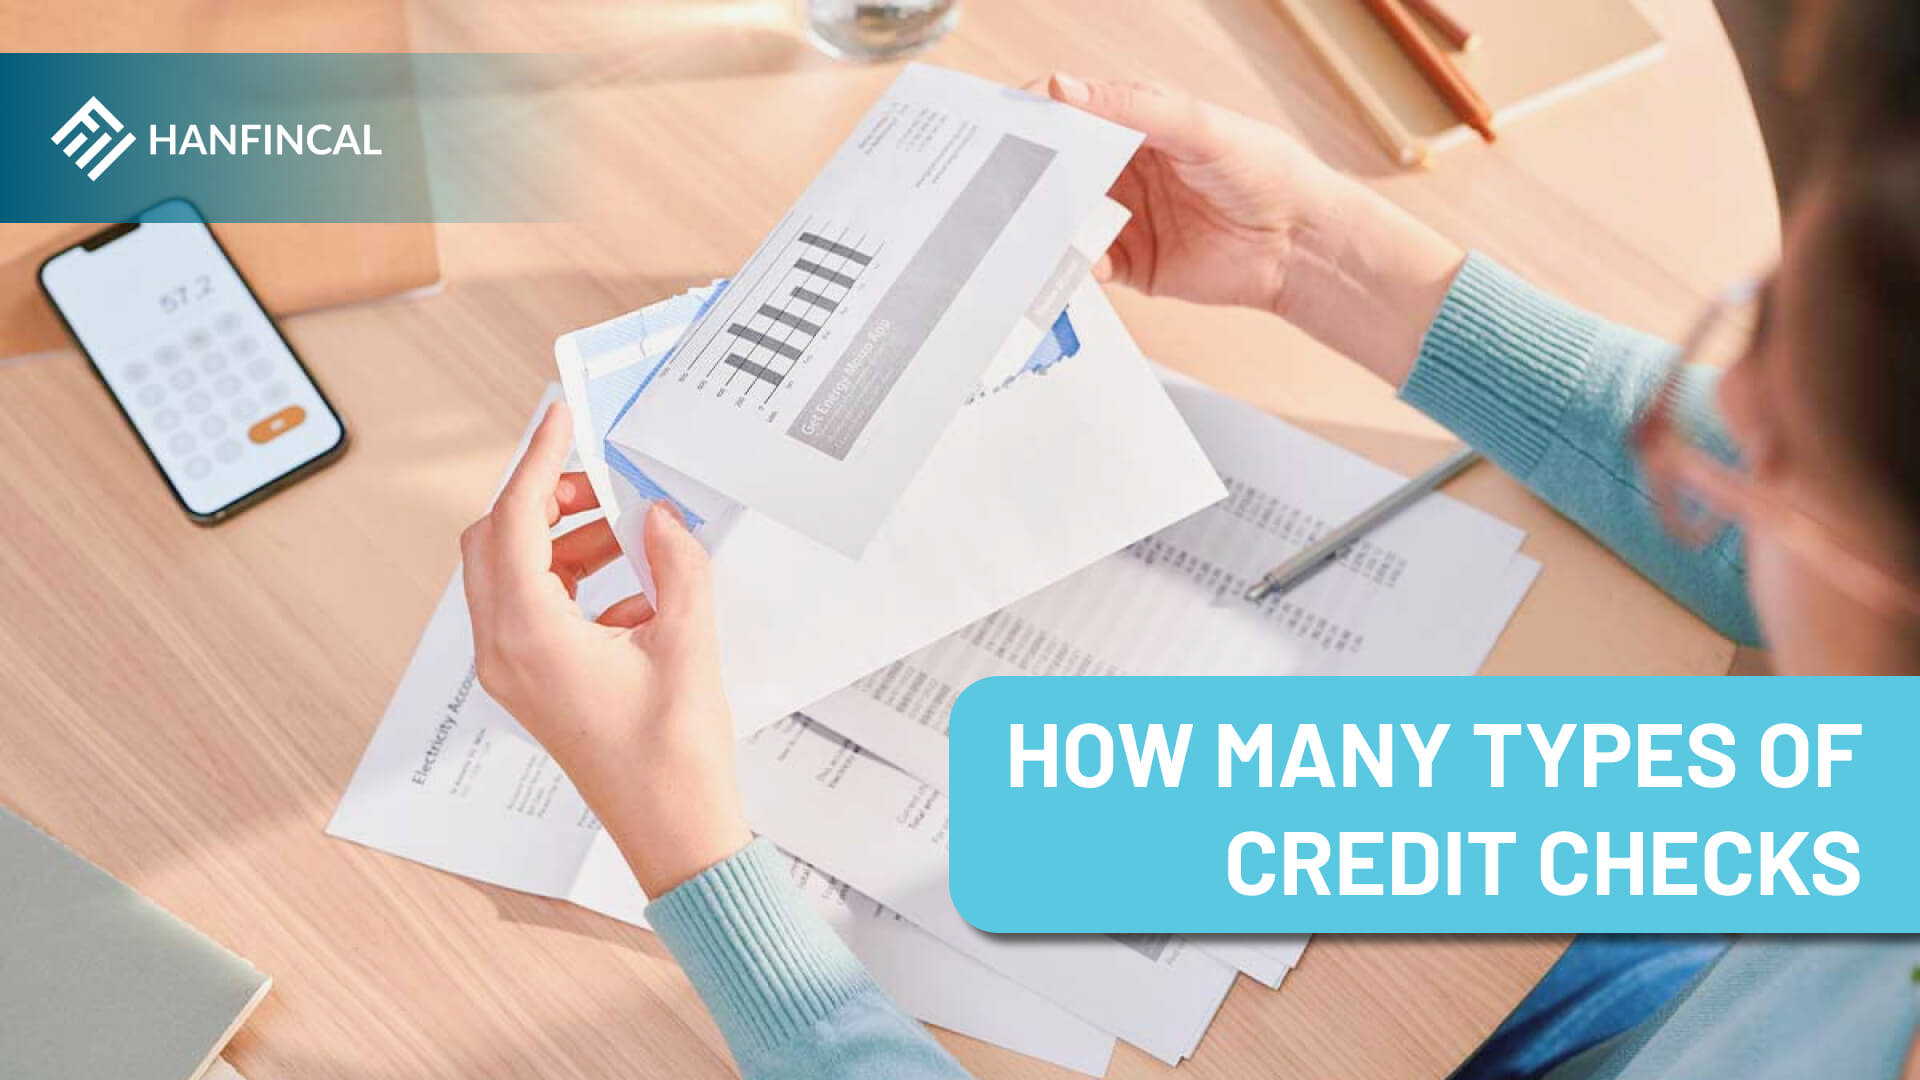 How many types of credit checks